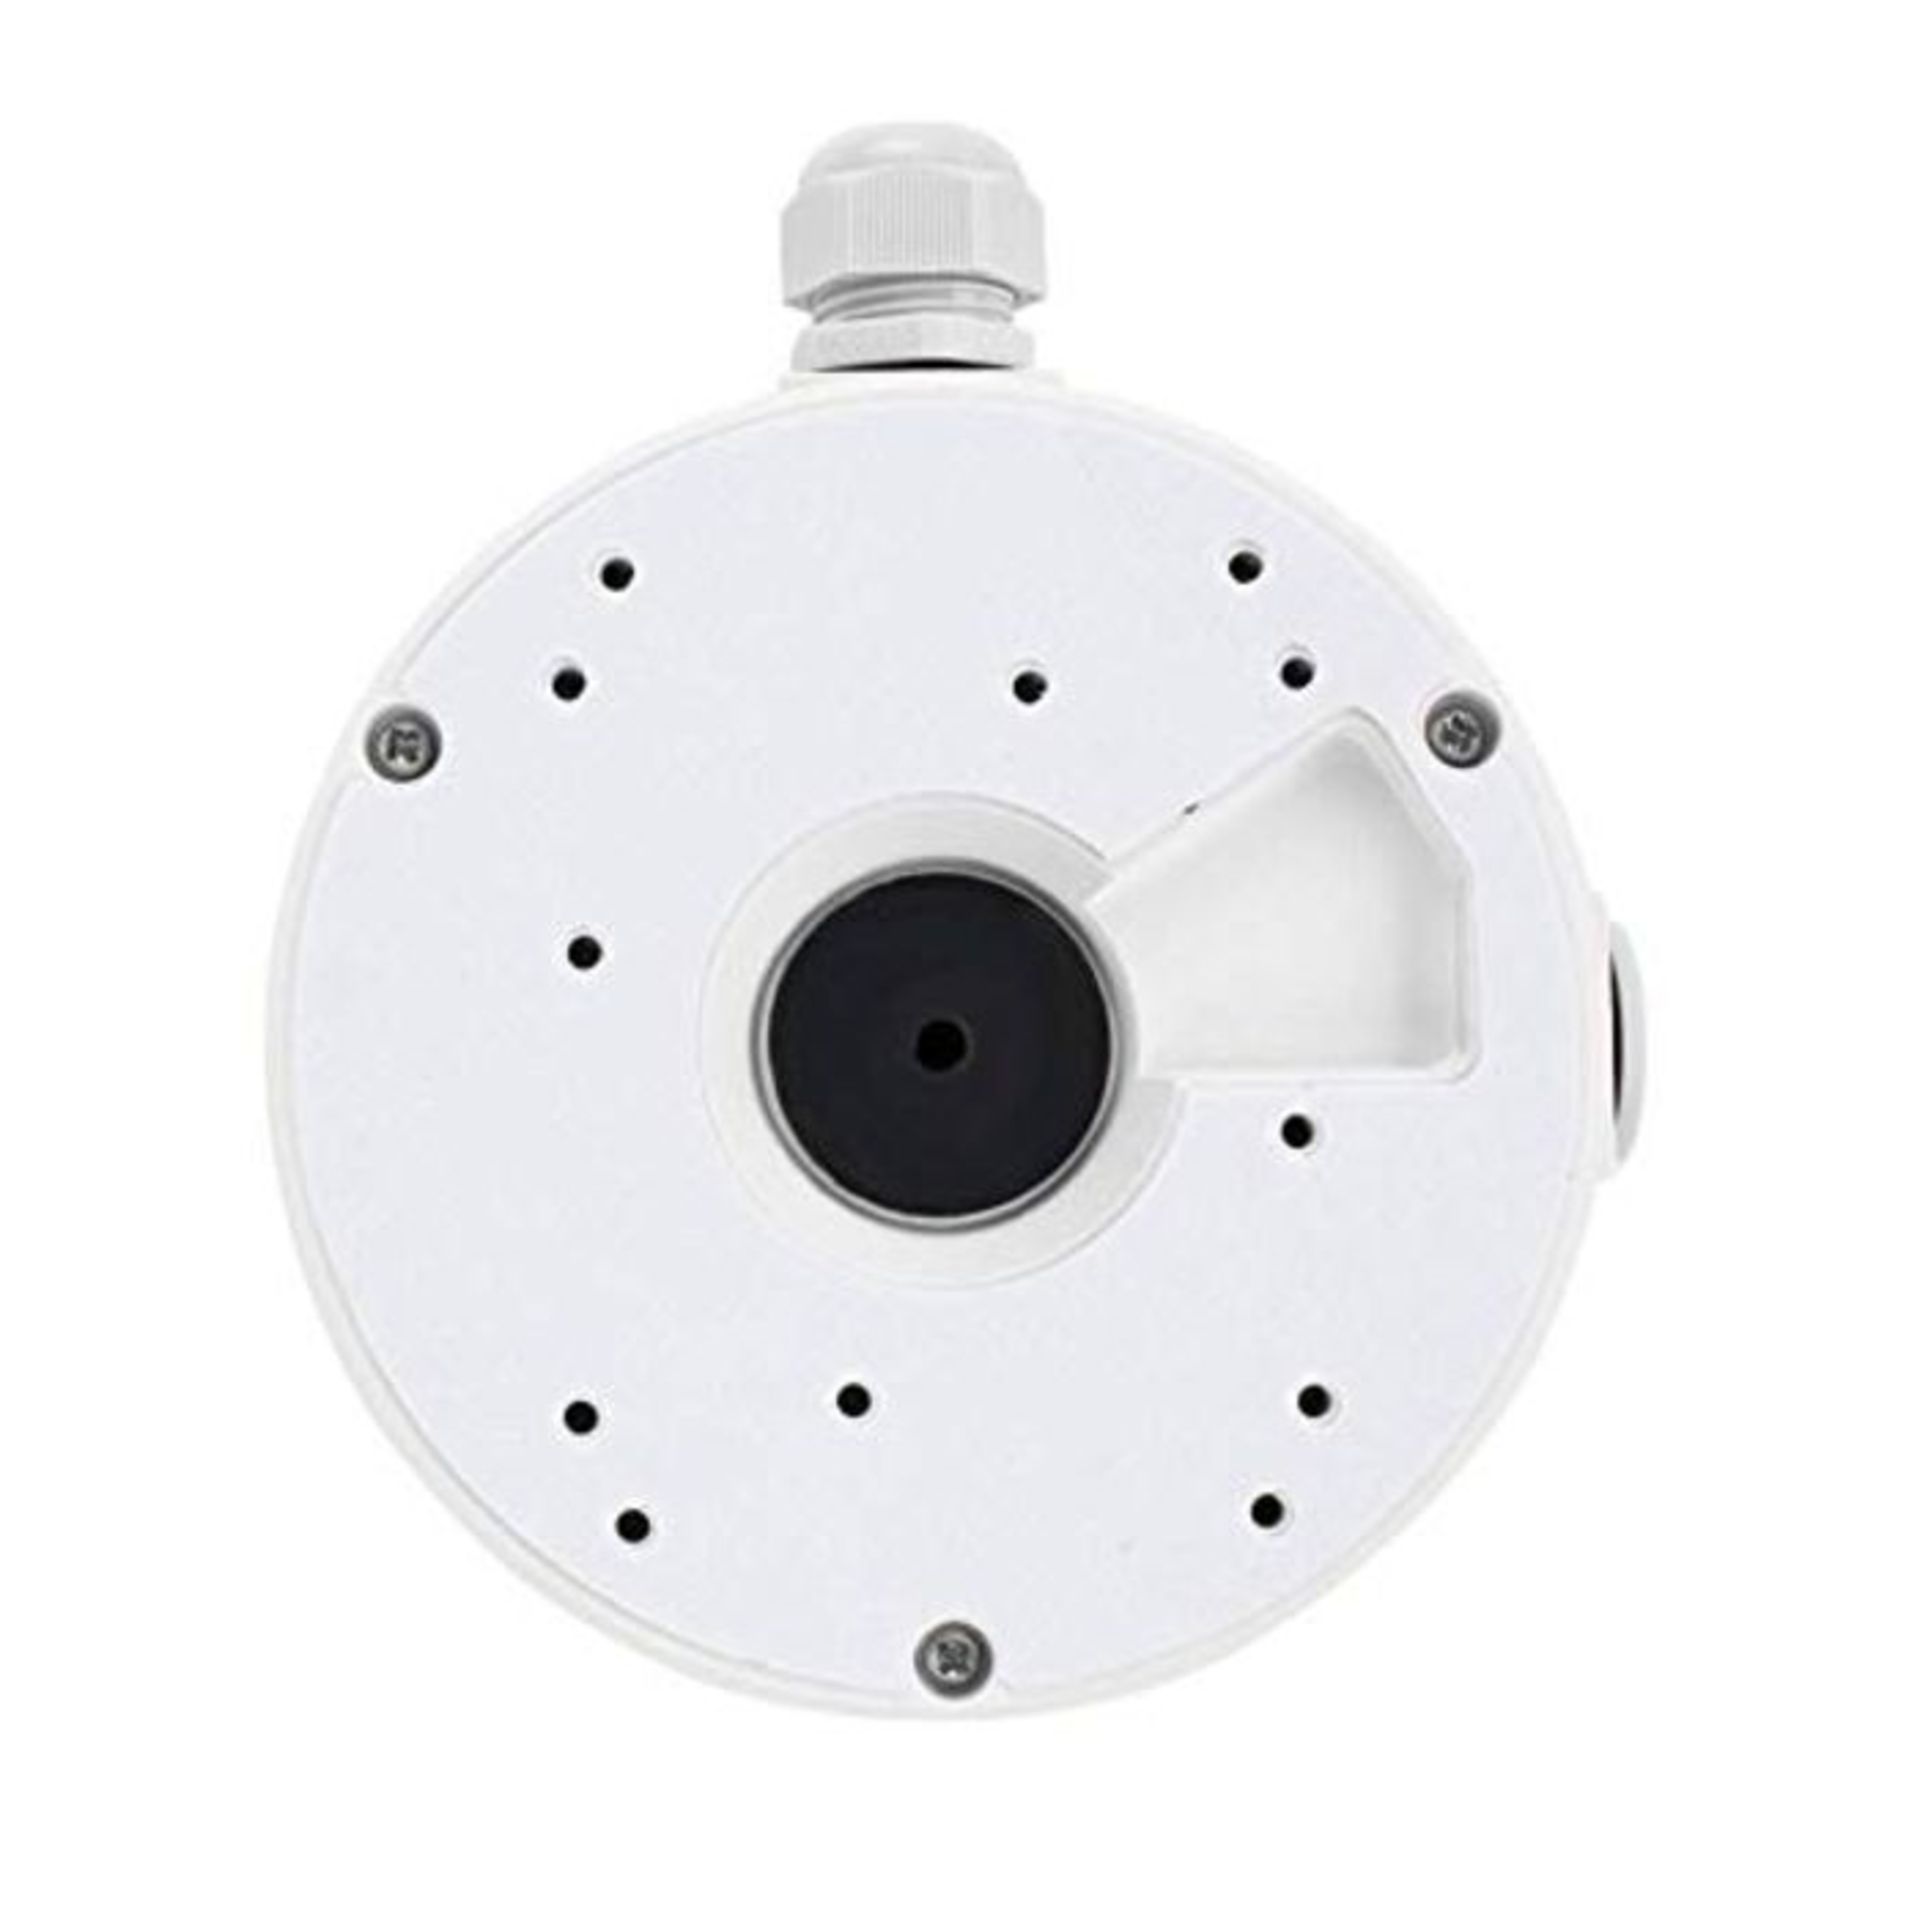 Reolink Junction Box D20, Only Designed for Reolink Dome IP Cameras RLC-520A, RLC-820A